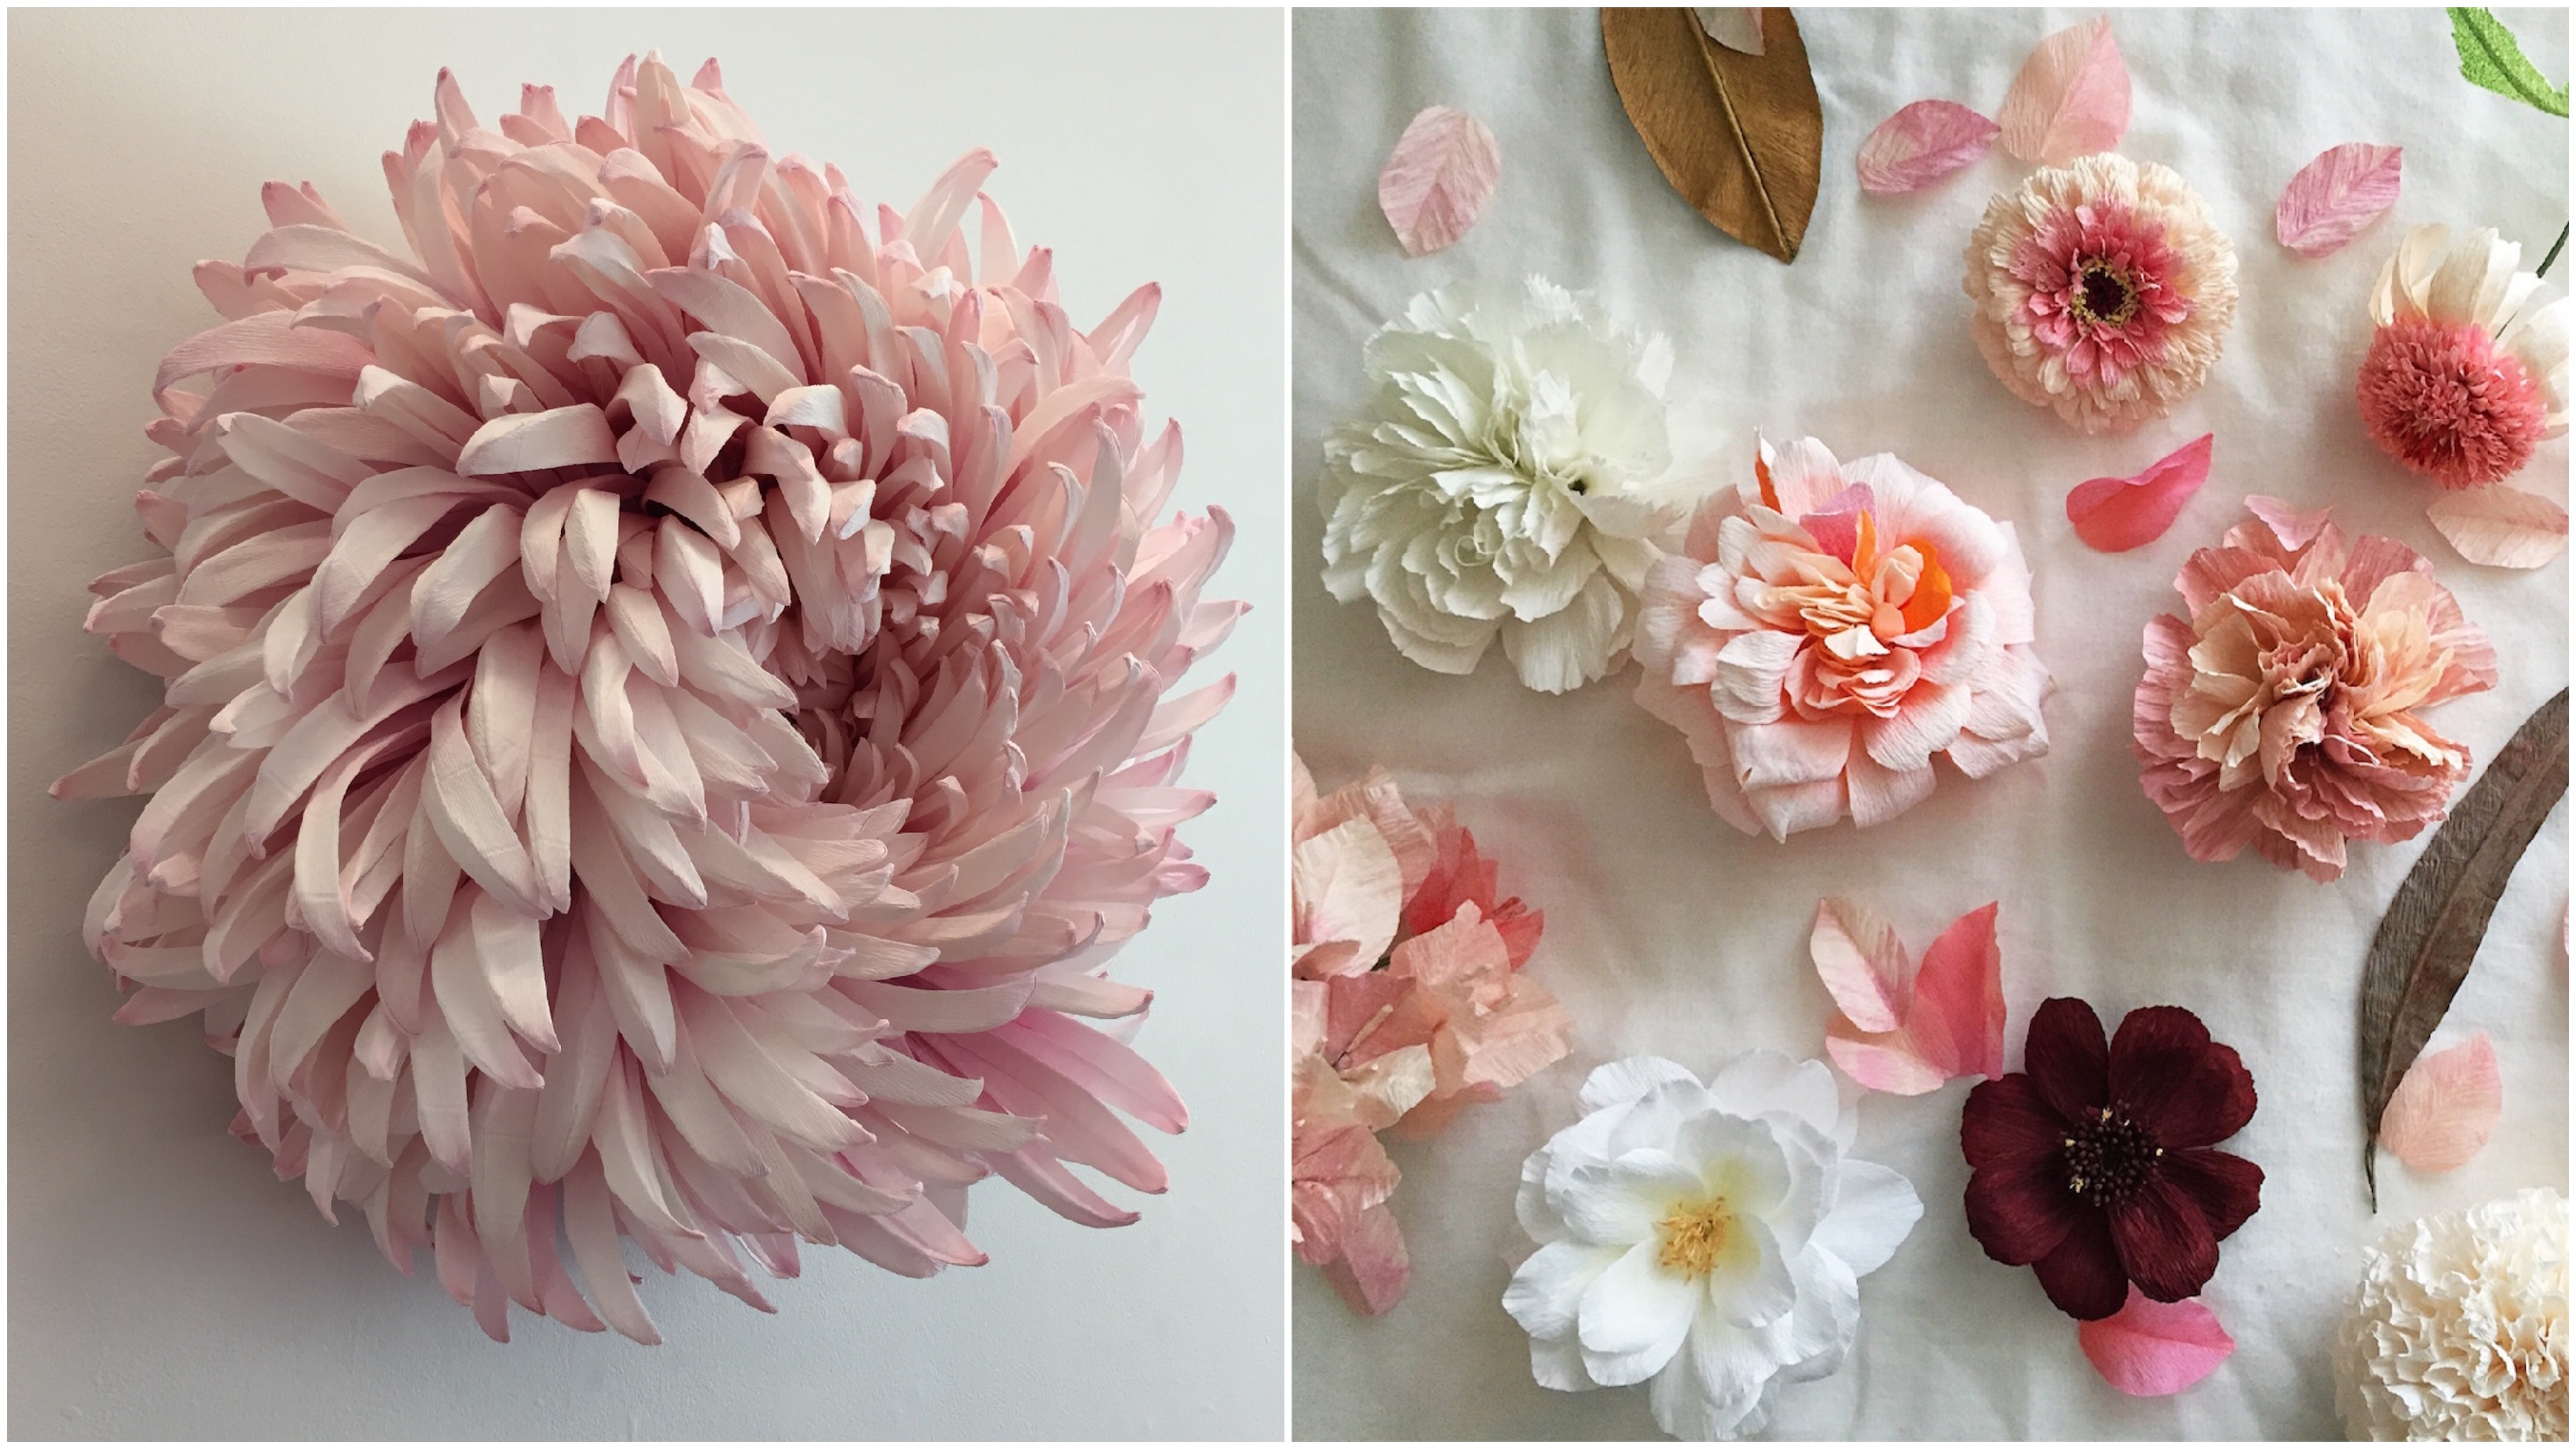 A Fanciful Twist: Crepe + Paper + Flowers